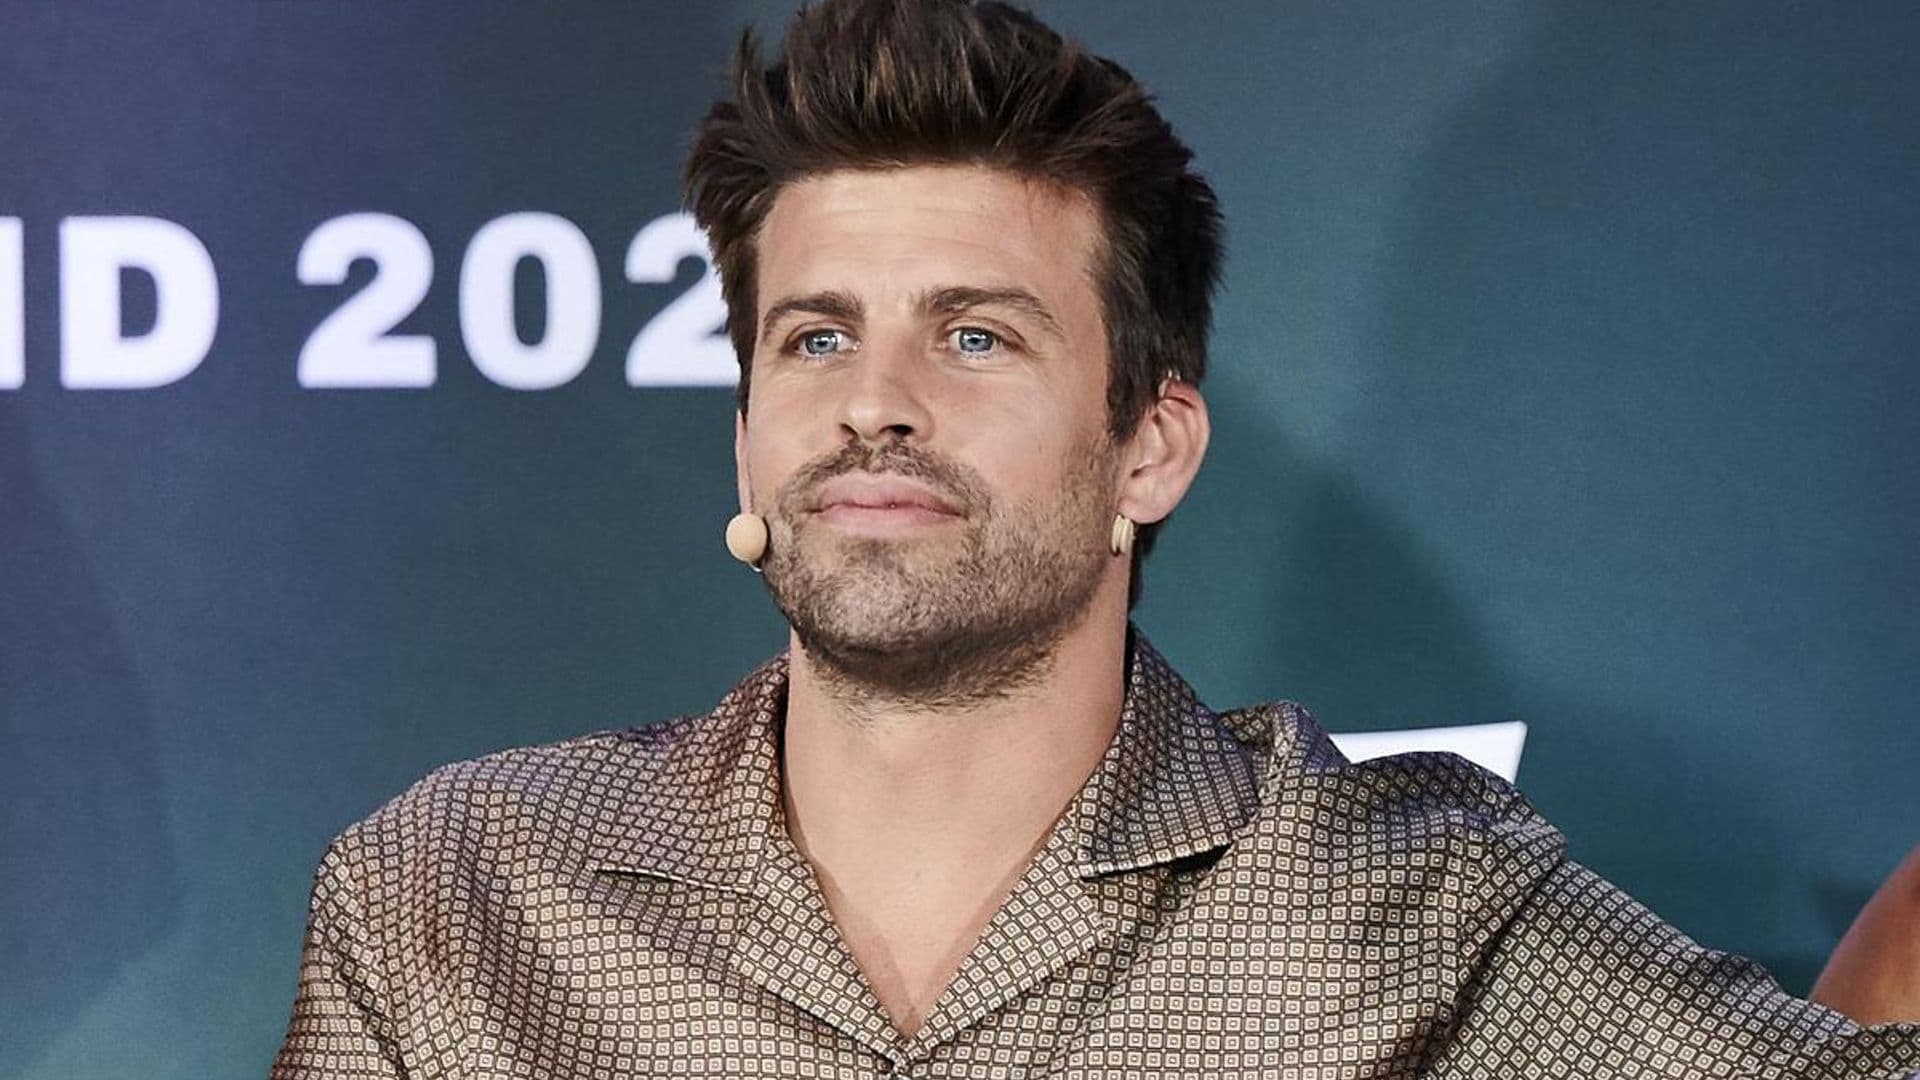 Pique reminisces when the world found out about his separation from Shakira